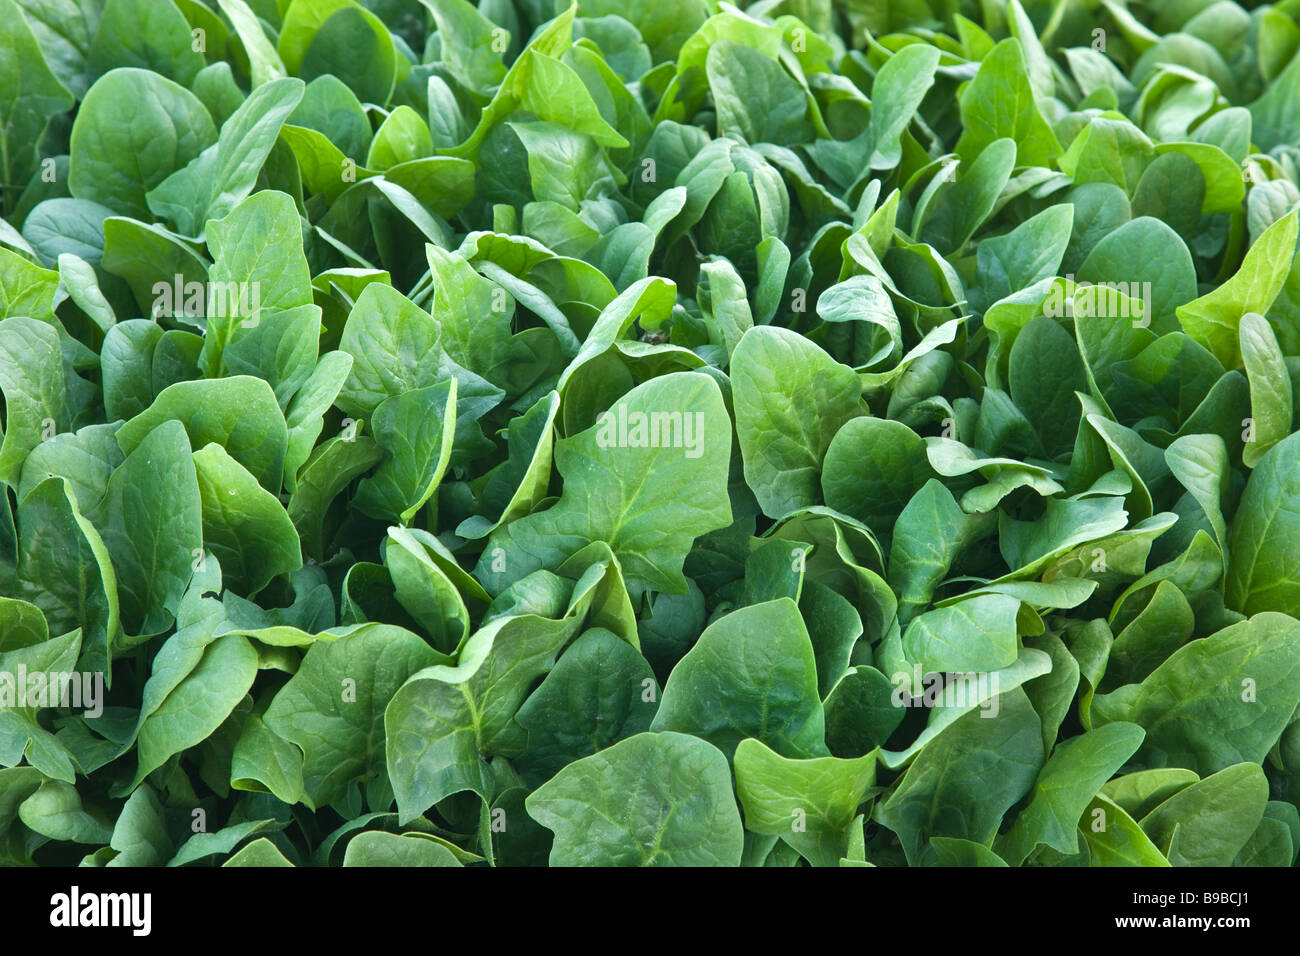 Closeup of mature Spinach growing in field. Stock Photo